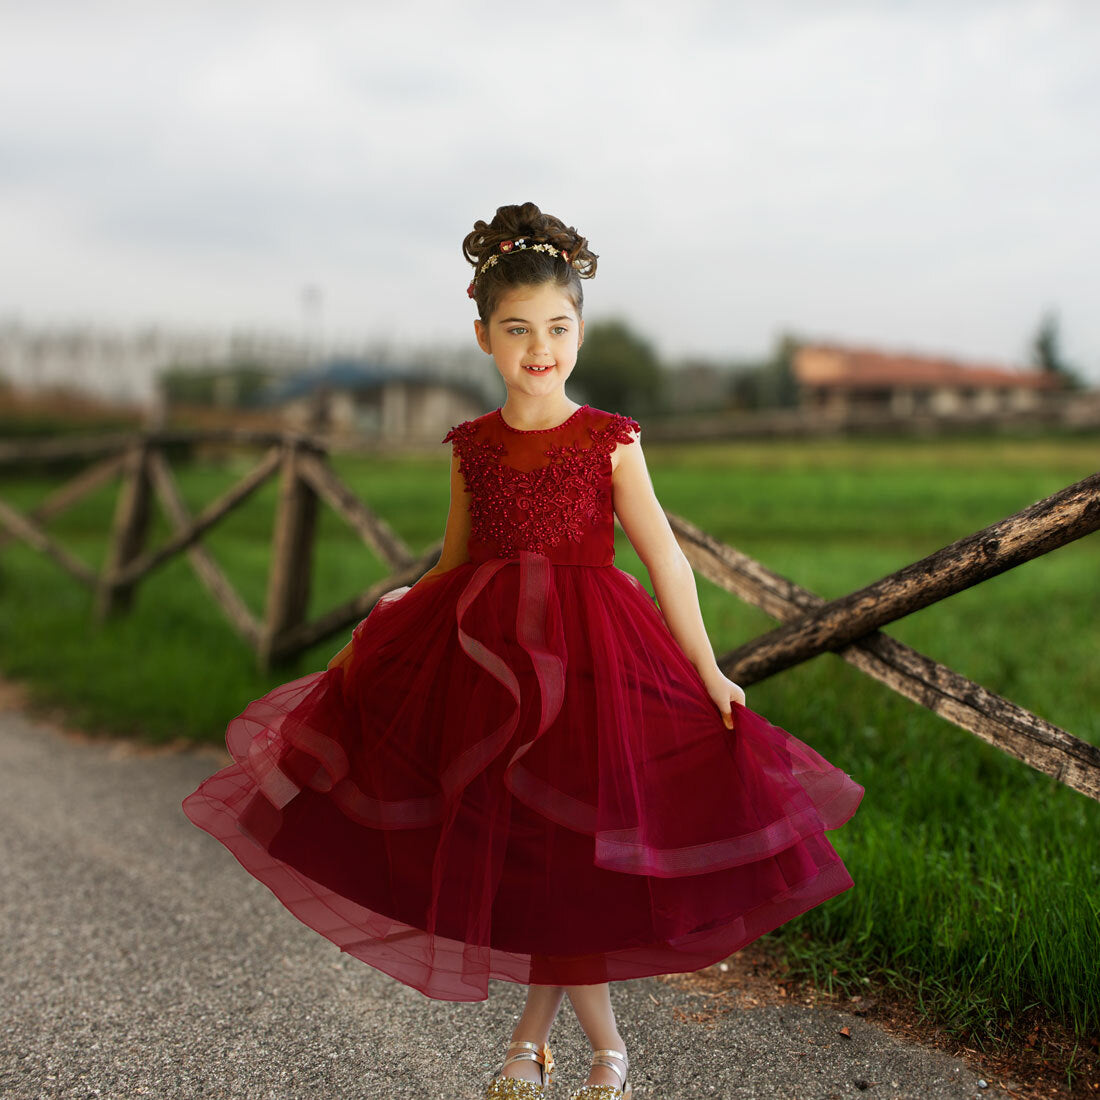 4 Flower Girl Dresses Perfect for a Rustic Wedding – Sara Dresses